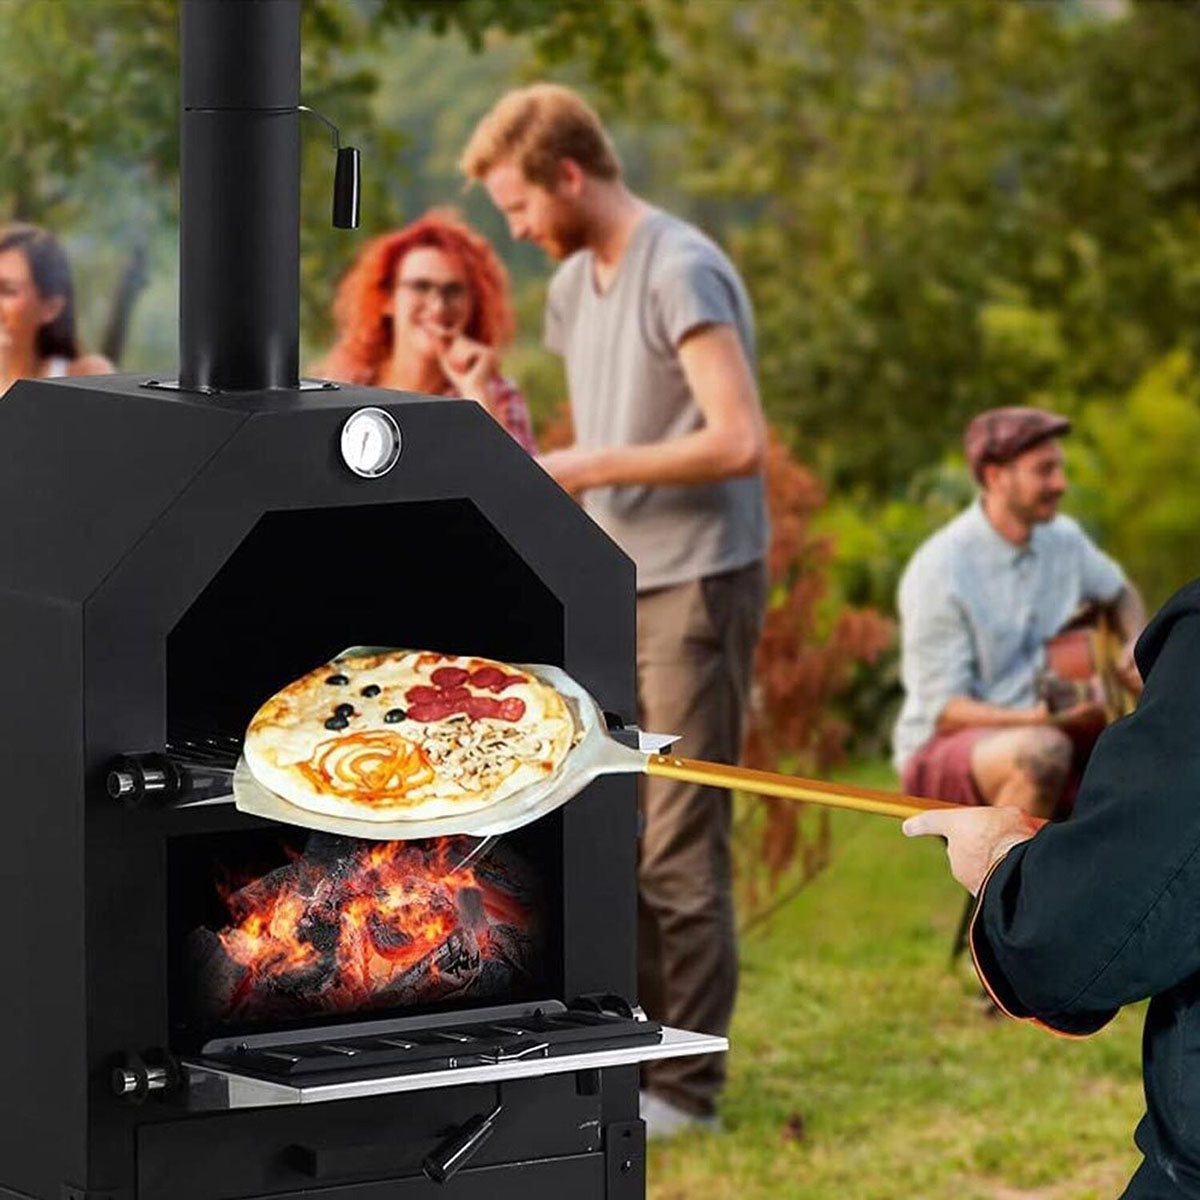 How To Use A Charcoal Pizza Oven